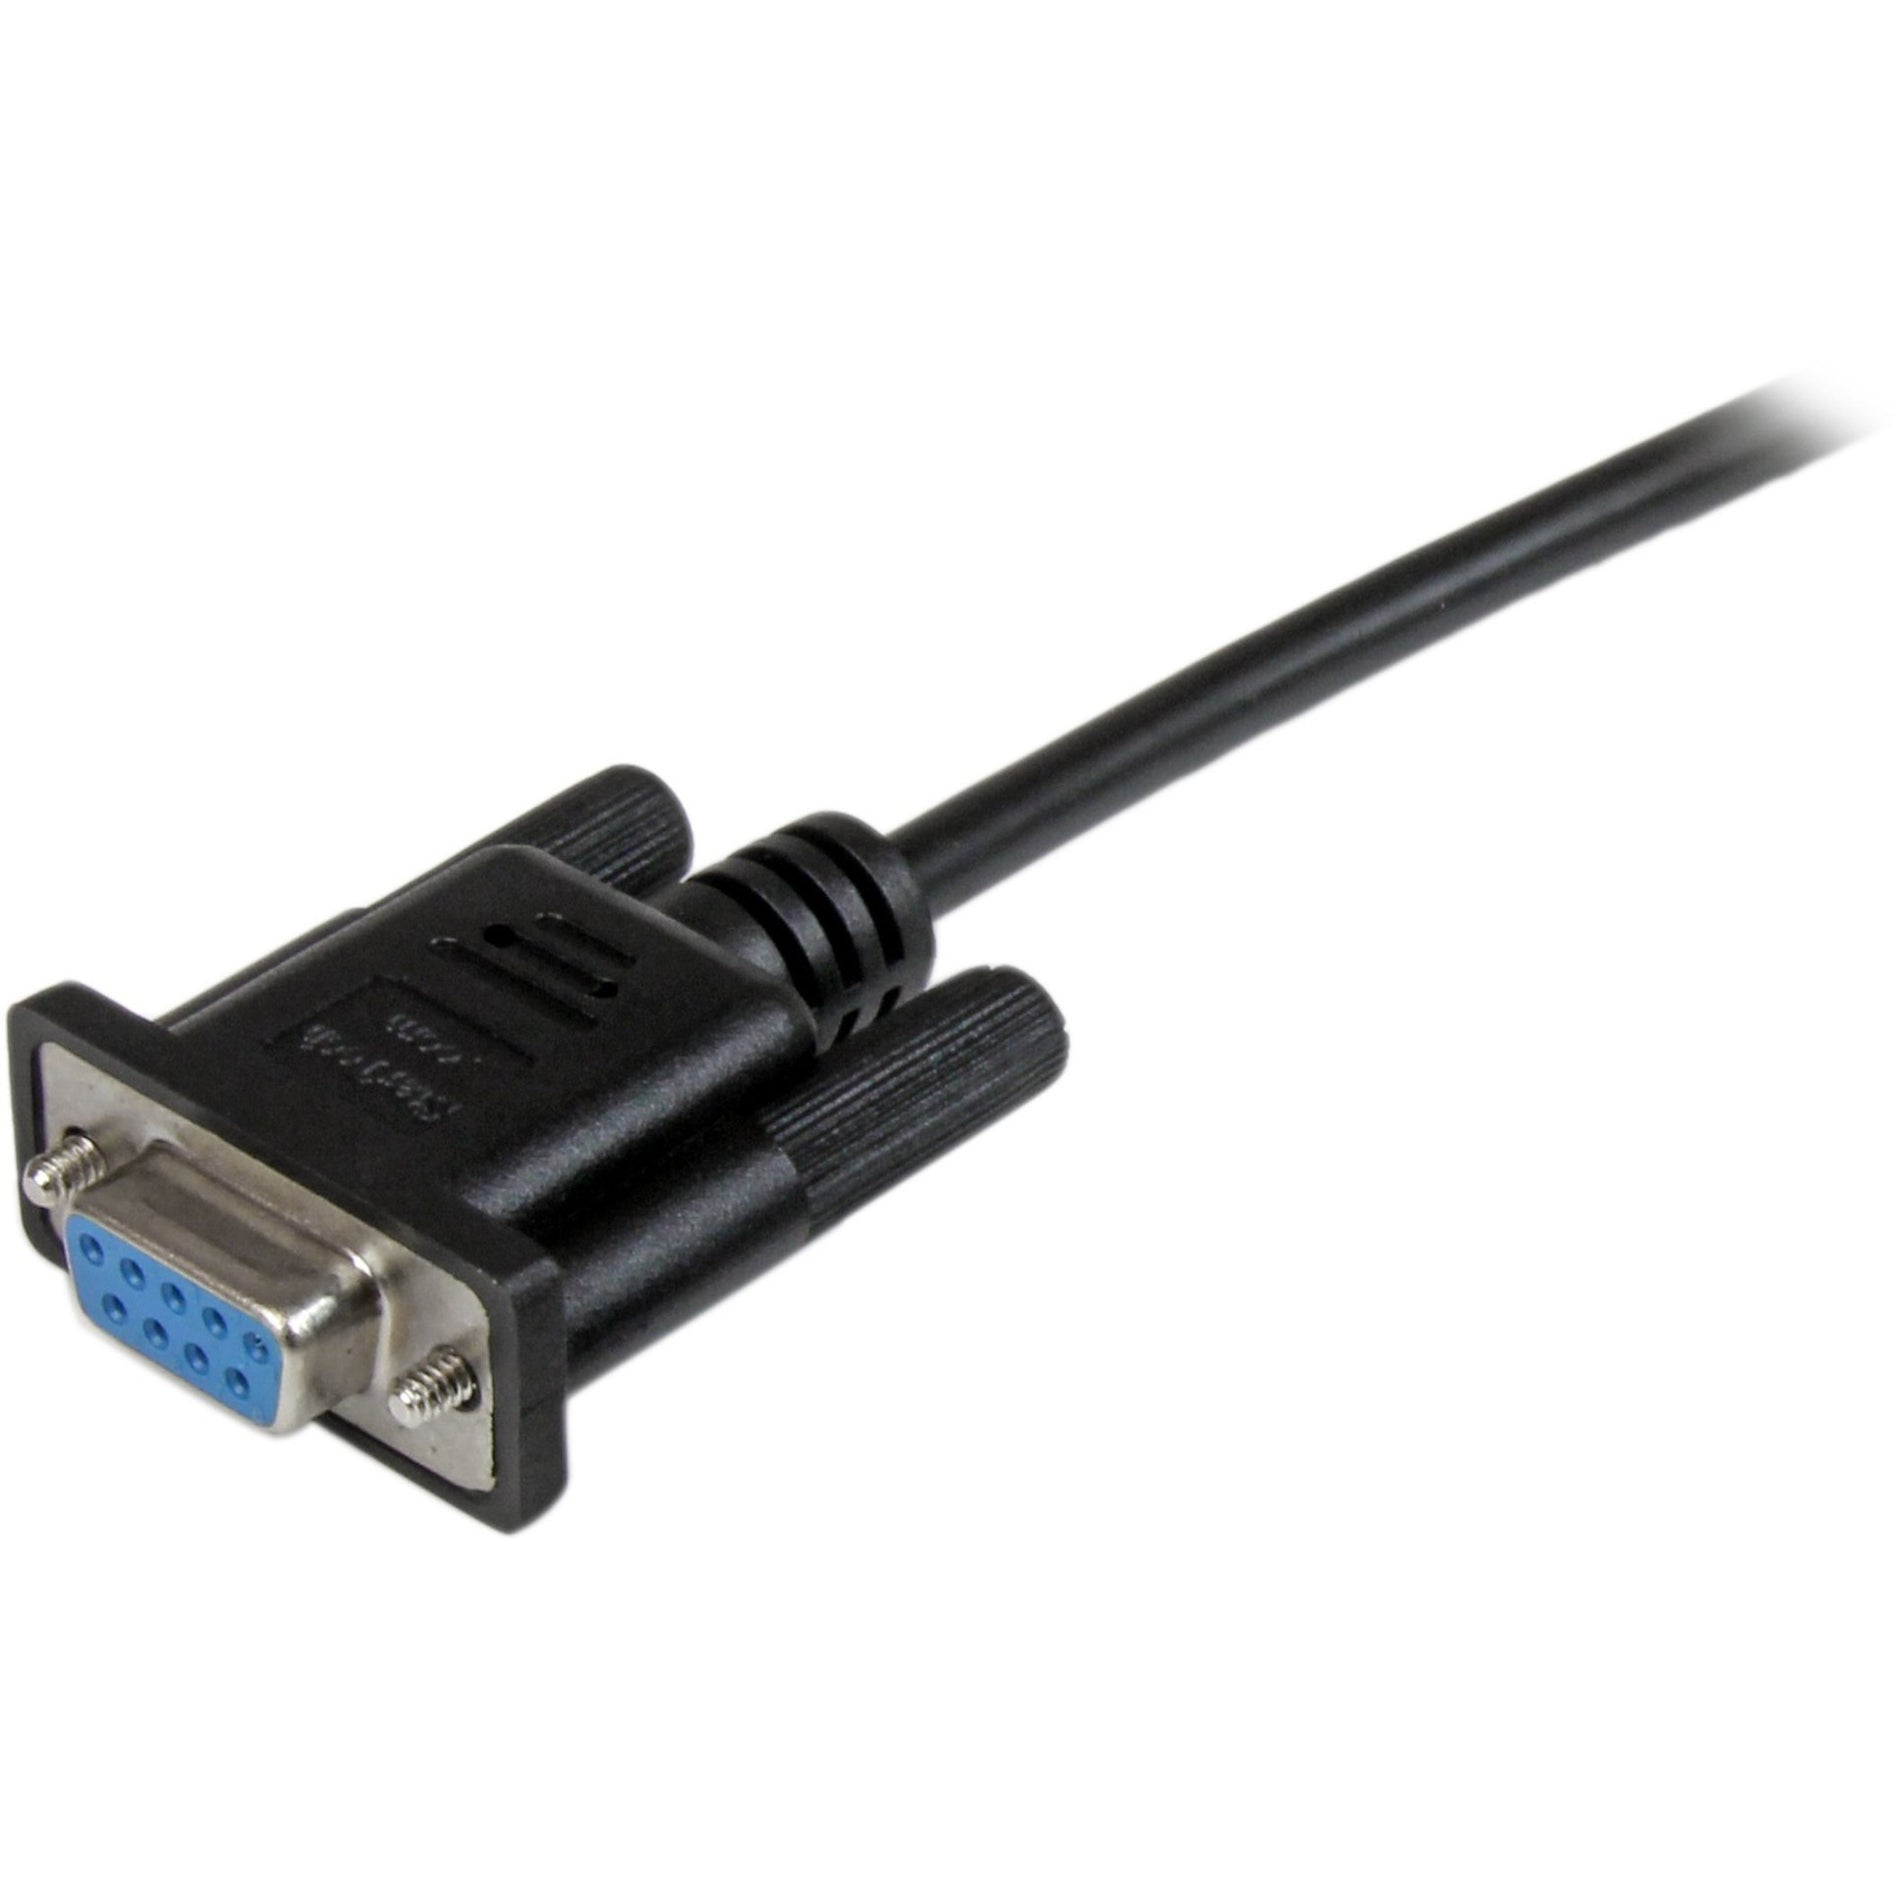 StarTech.com SCNM9FF1MBK 1m Black DB9 RS232 Serial Null Modem Cable F/F, Molded, EMI Protection, Strain Relief